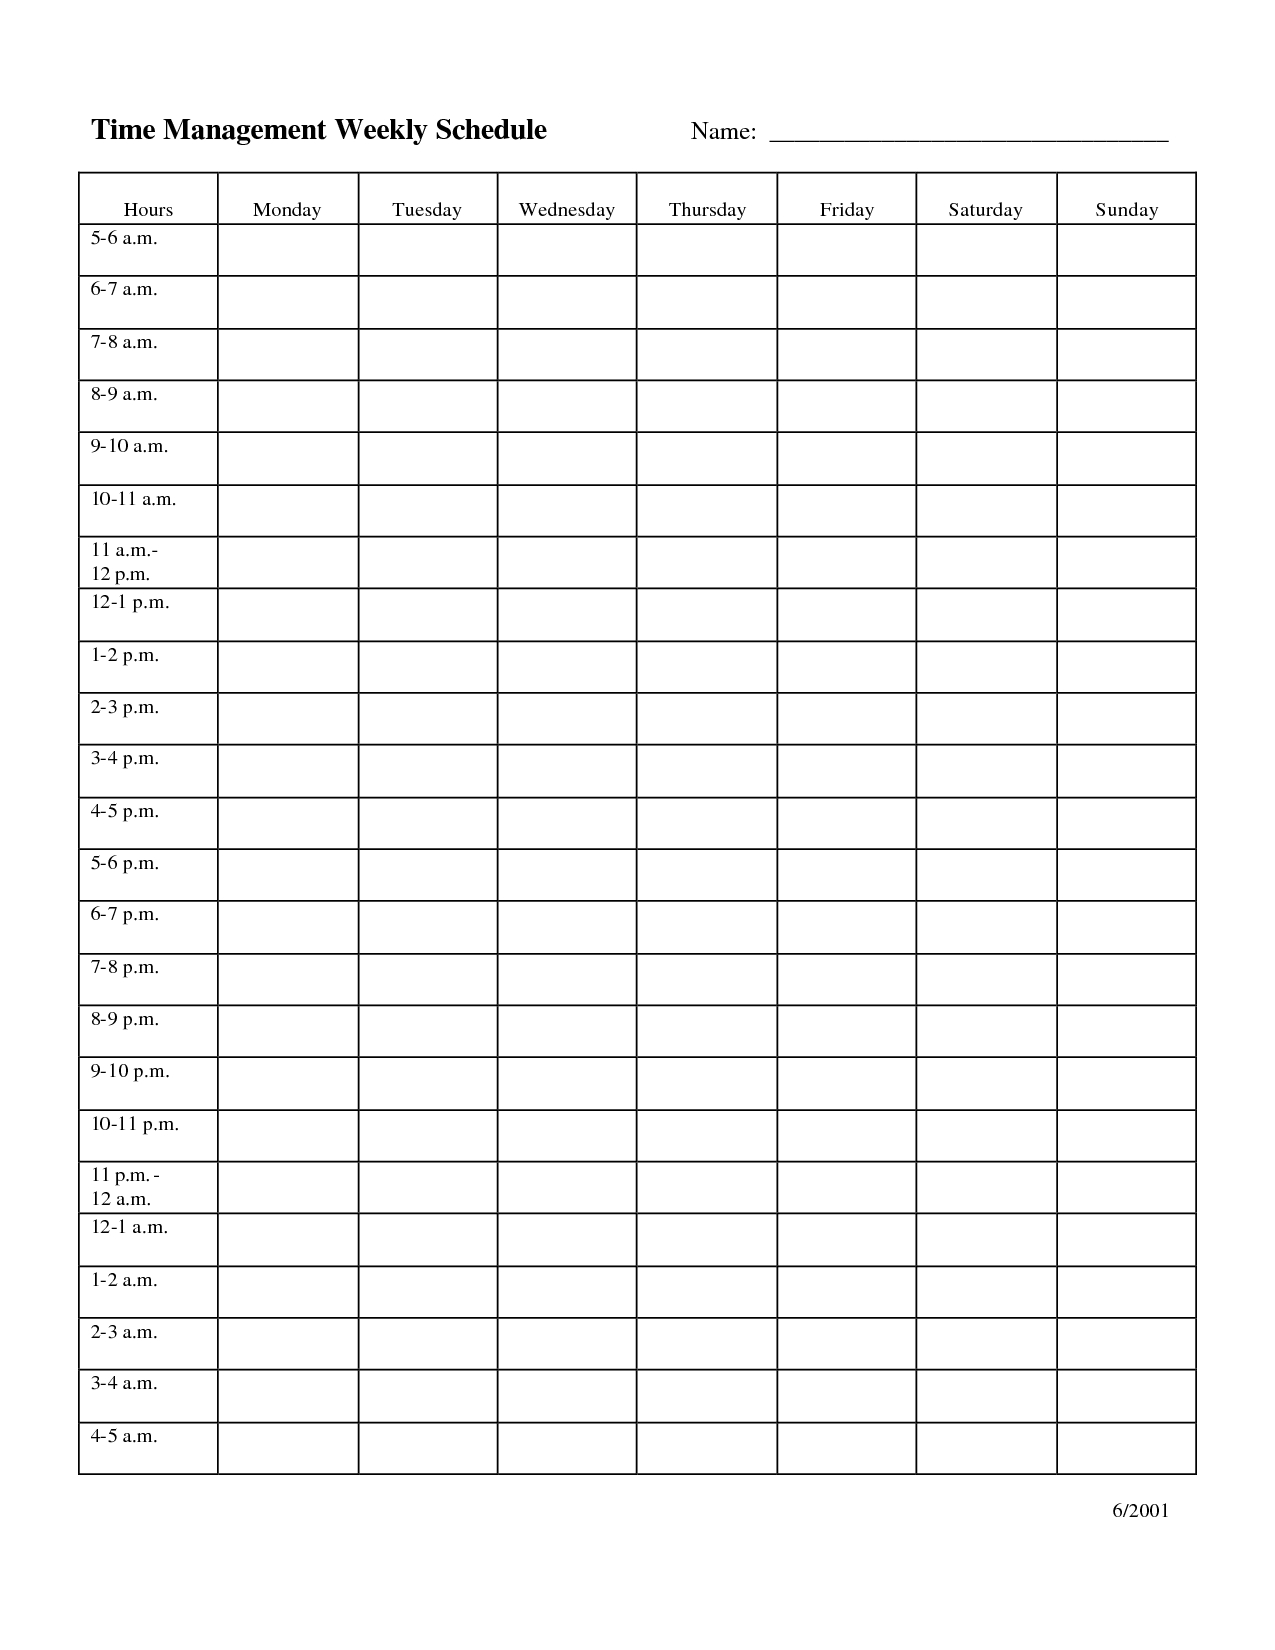 Time Management Weekly Schedule Template … | Bobbies Wish List | Sched… pertaining to Weekly Schedule Template With Times